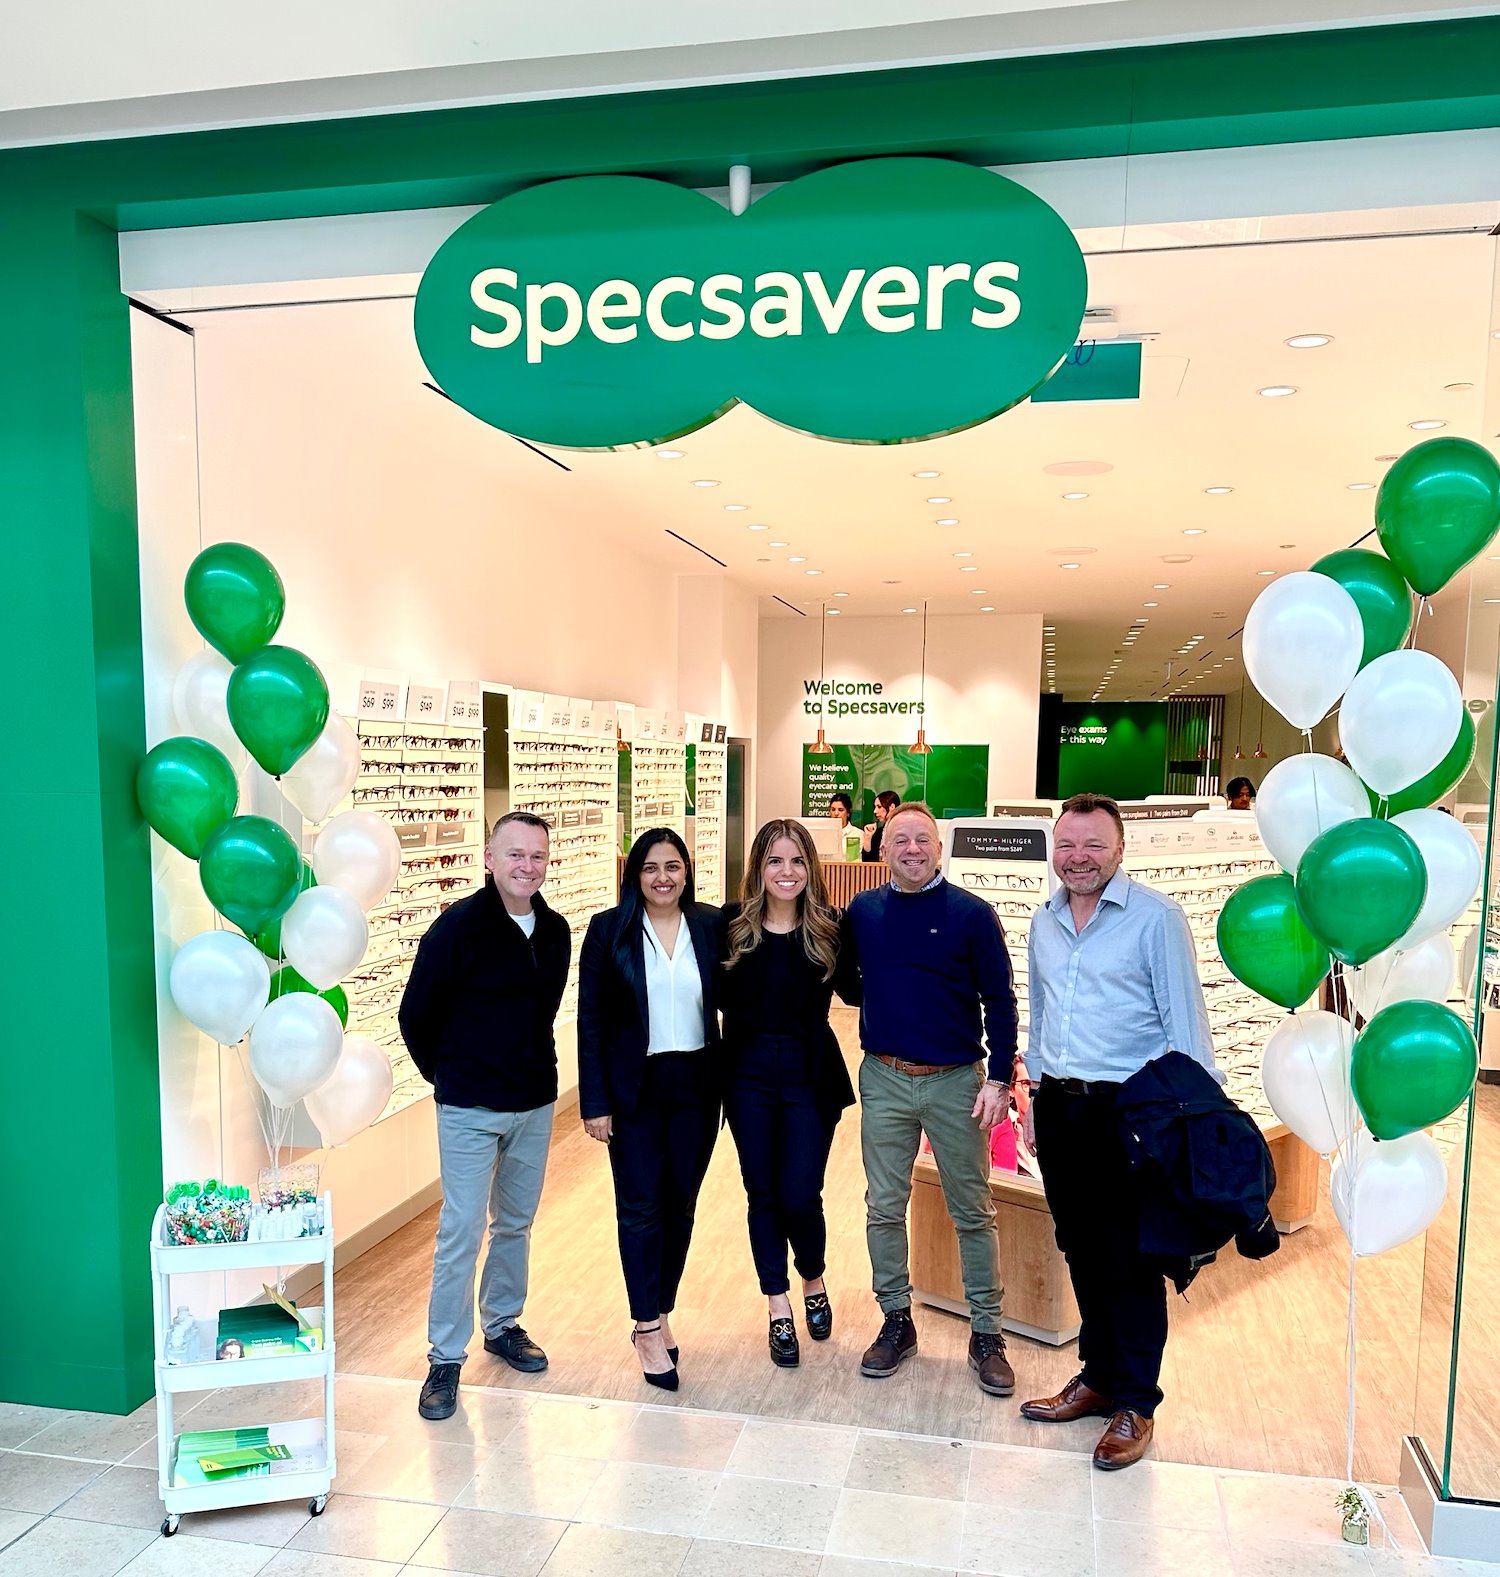 Images Specsavers Sherway Gardens